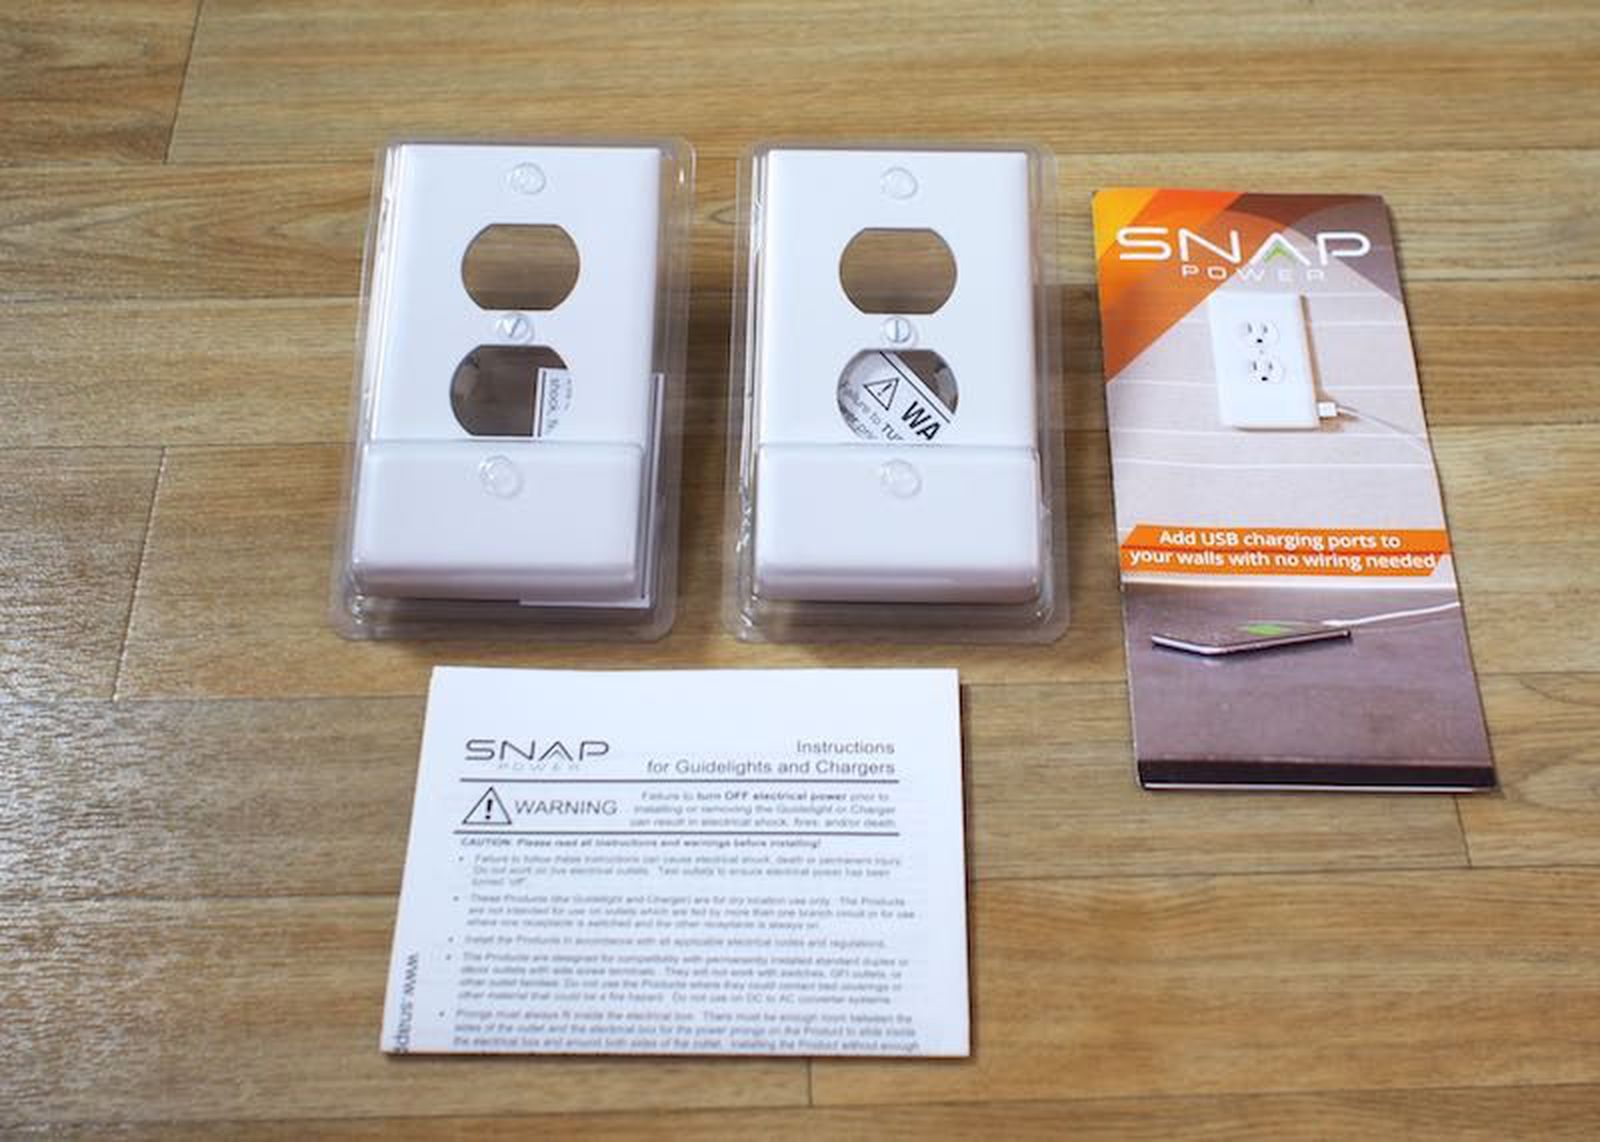 QUICK REVIEW: SnapPower Guidelight 2 Plus Outlet Cover - At Home